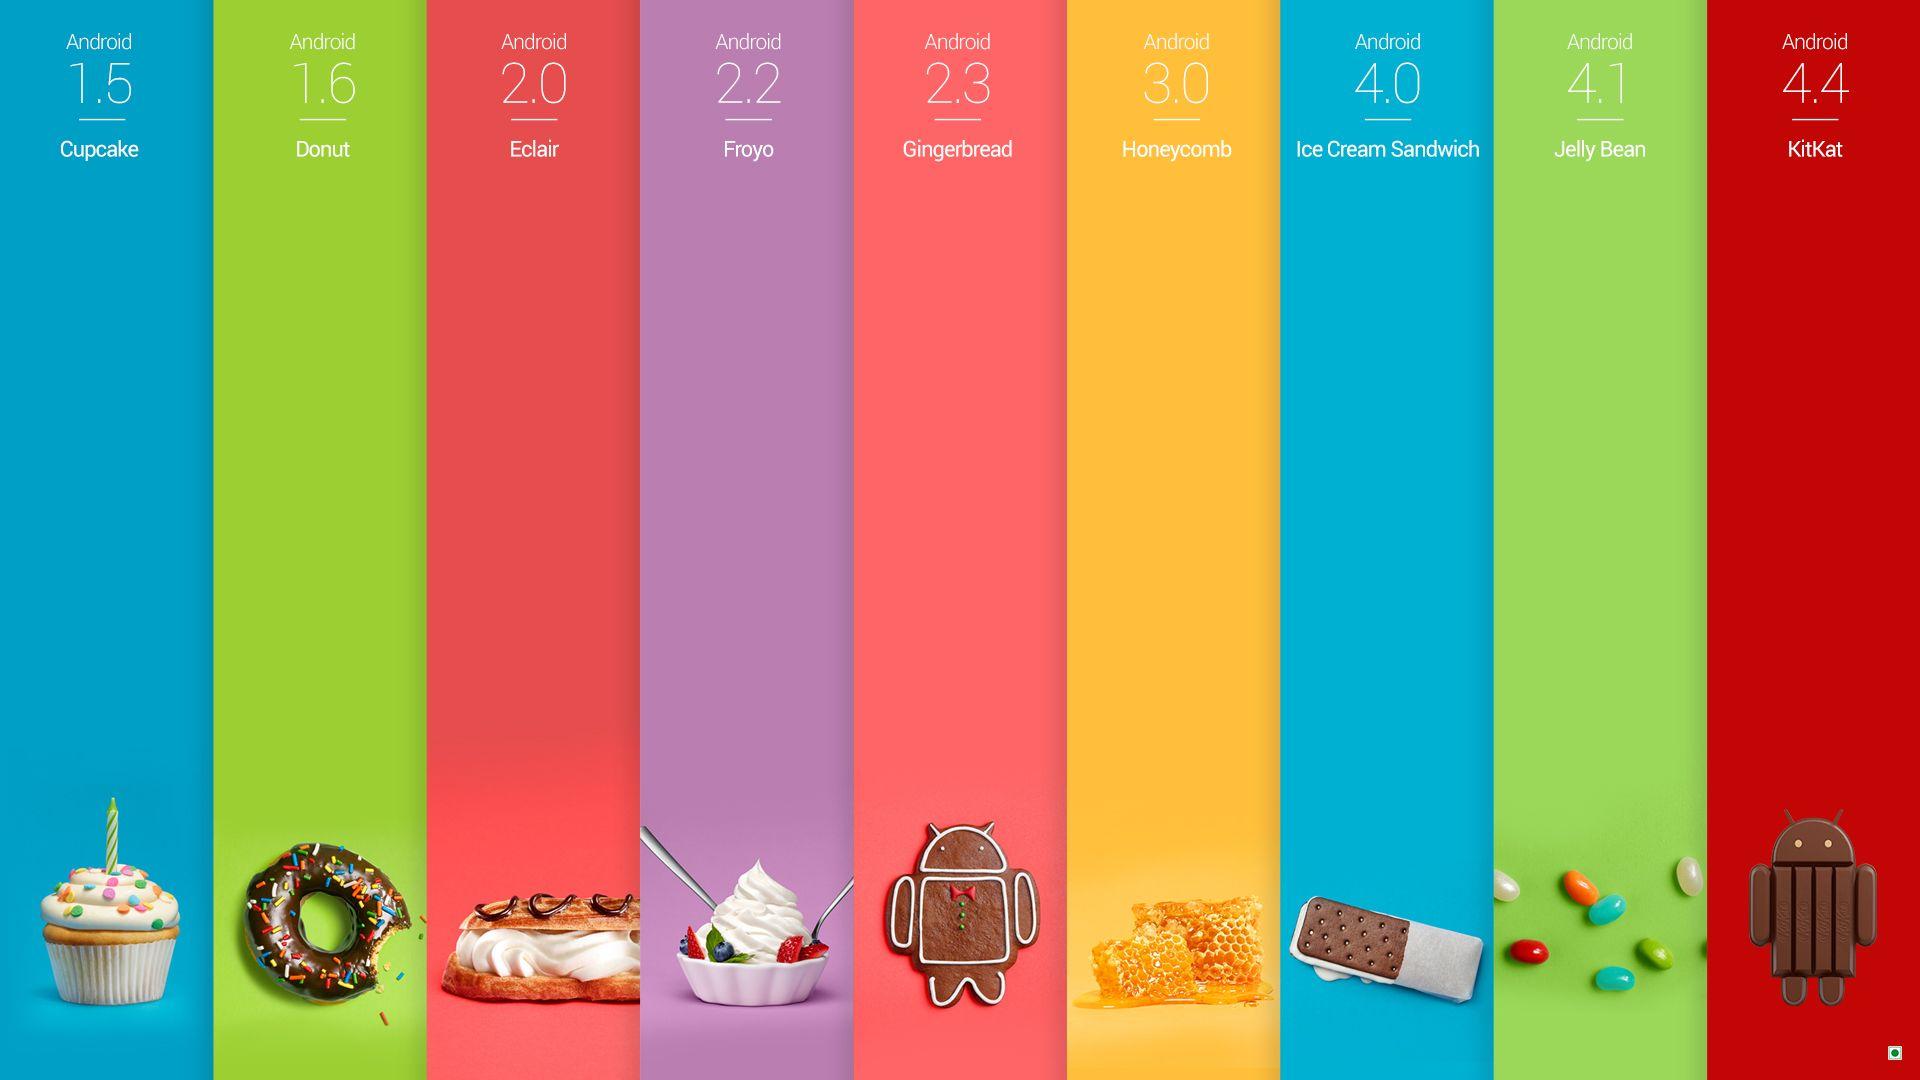 Android 4.4 KitKat Wallpaper. Method of Tried